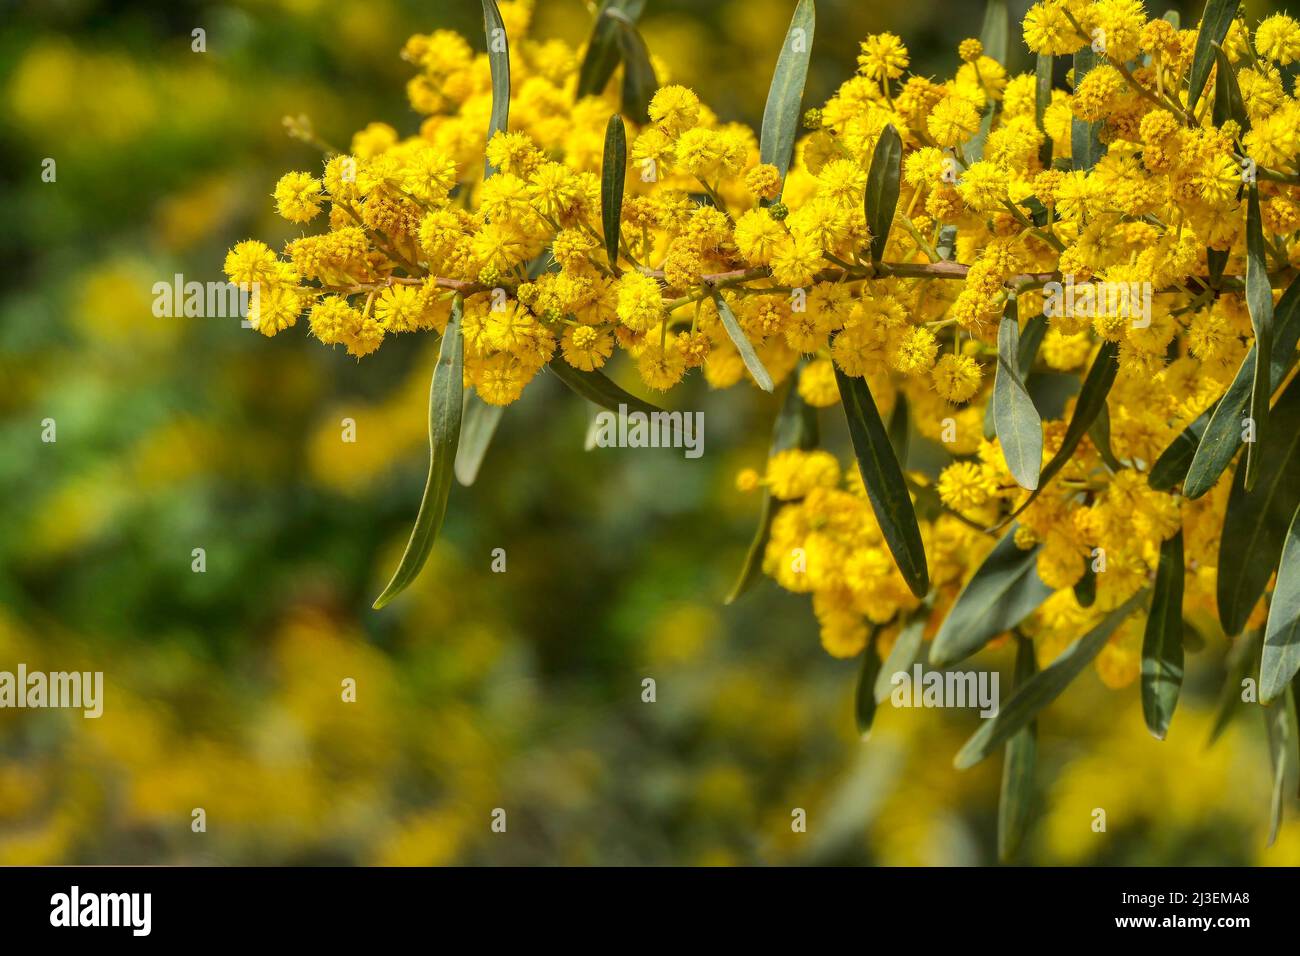 Yellow flowers of a flowering Cootamundra wattle Acacia baileyana tree close-up on a blurred background Stock Photo